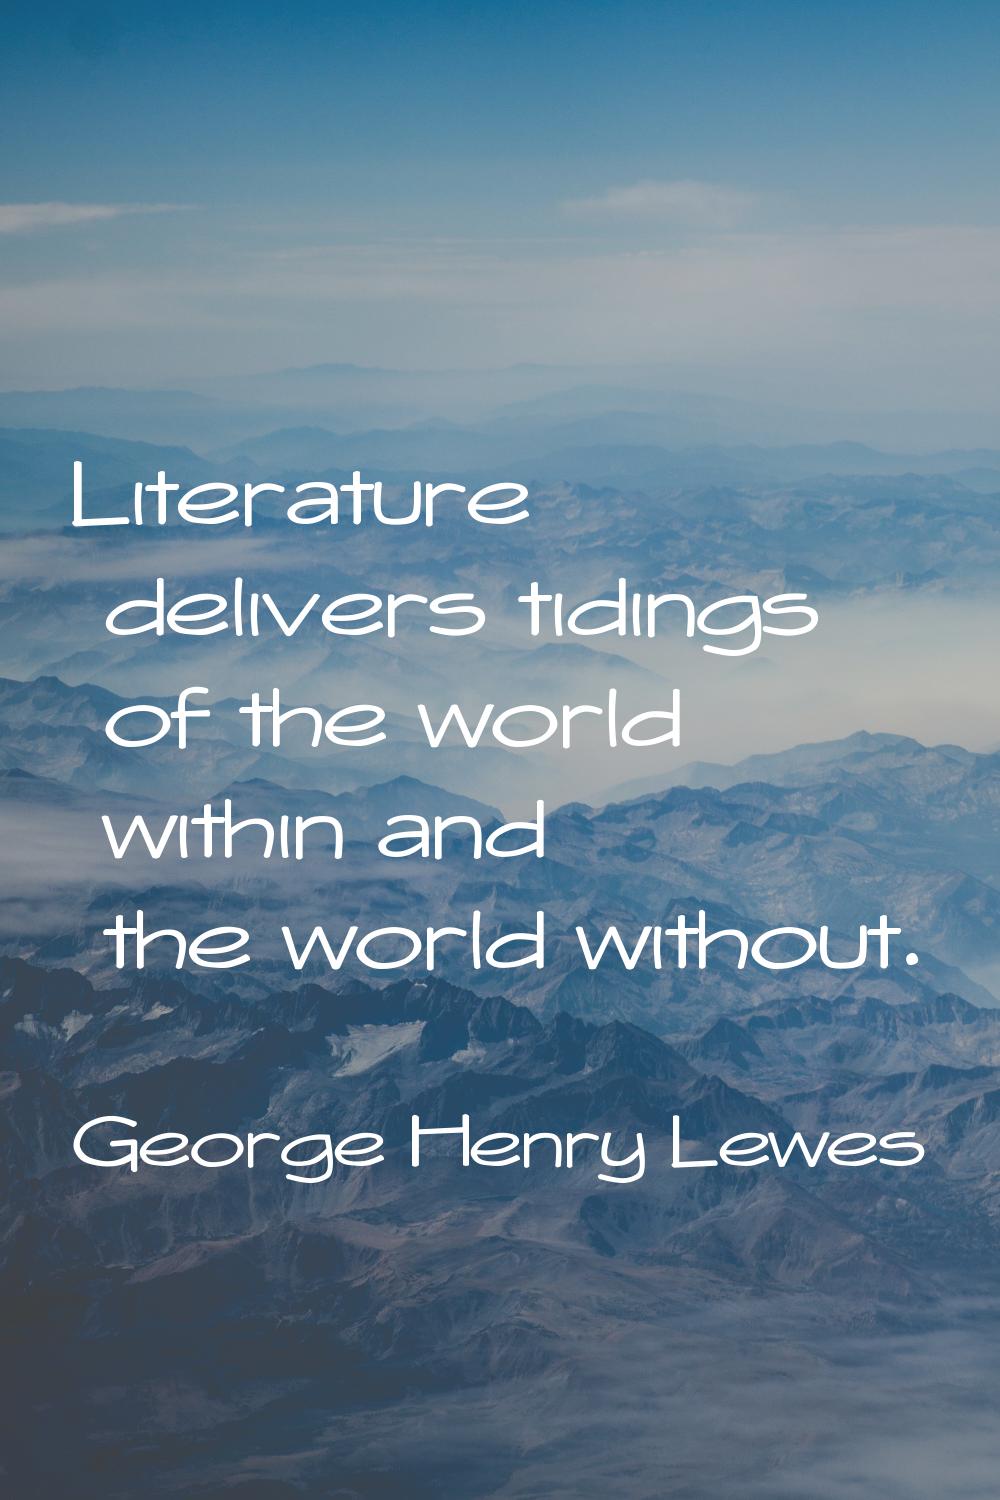 Literature delivers tidings of the world within and the world without.